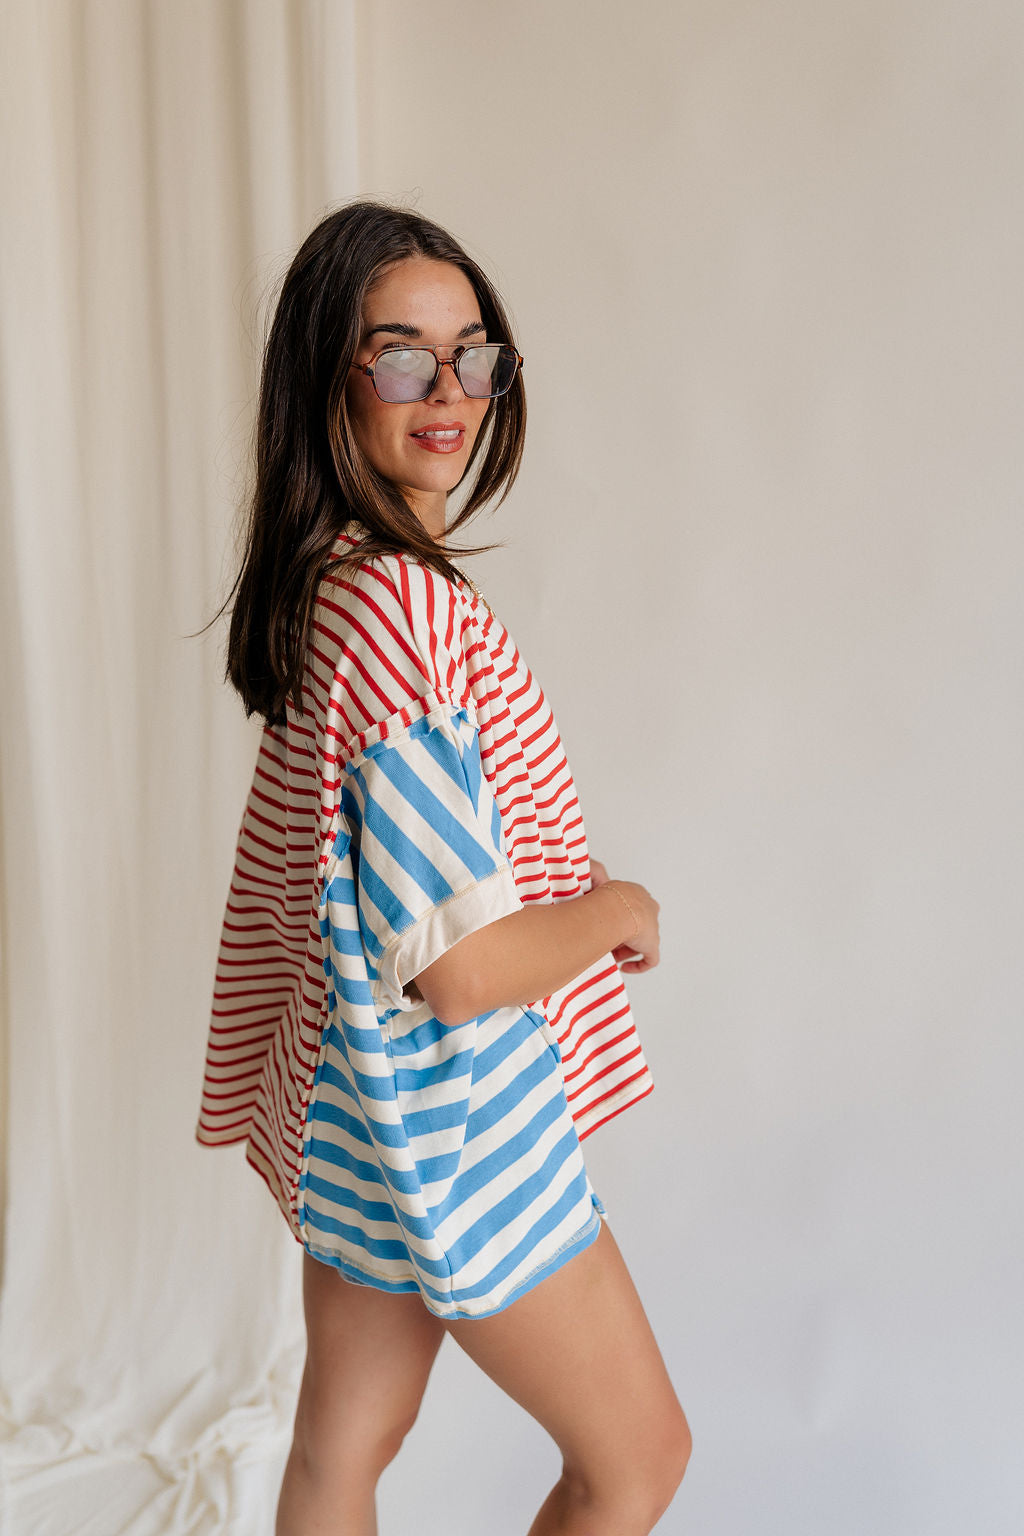 Side view of female model wearing the Abigail Red, Cream, & Blue Striped Top that has a red striped center, blue striped sides, a round neck, short sleeves, and oversize fit.